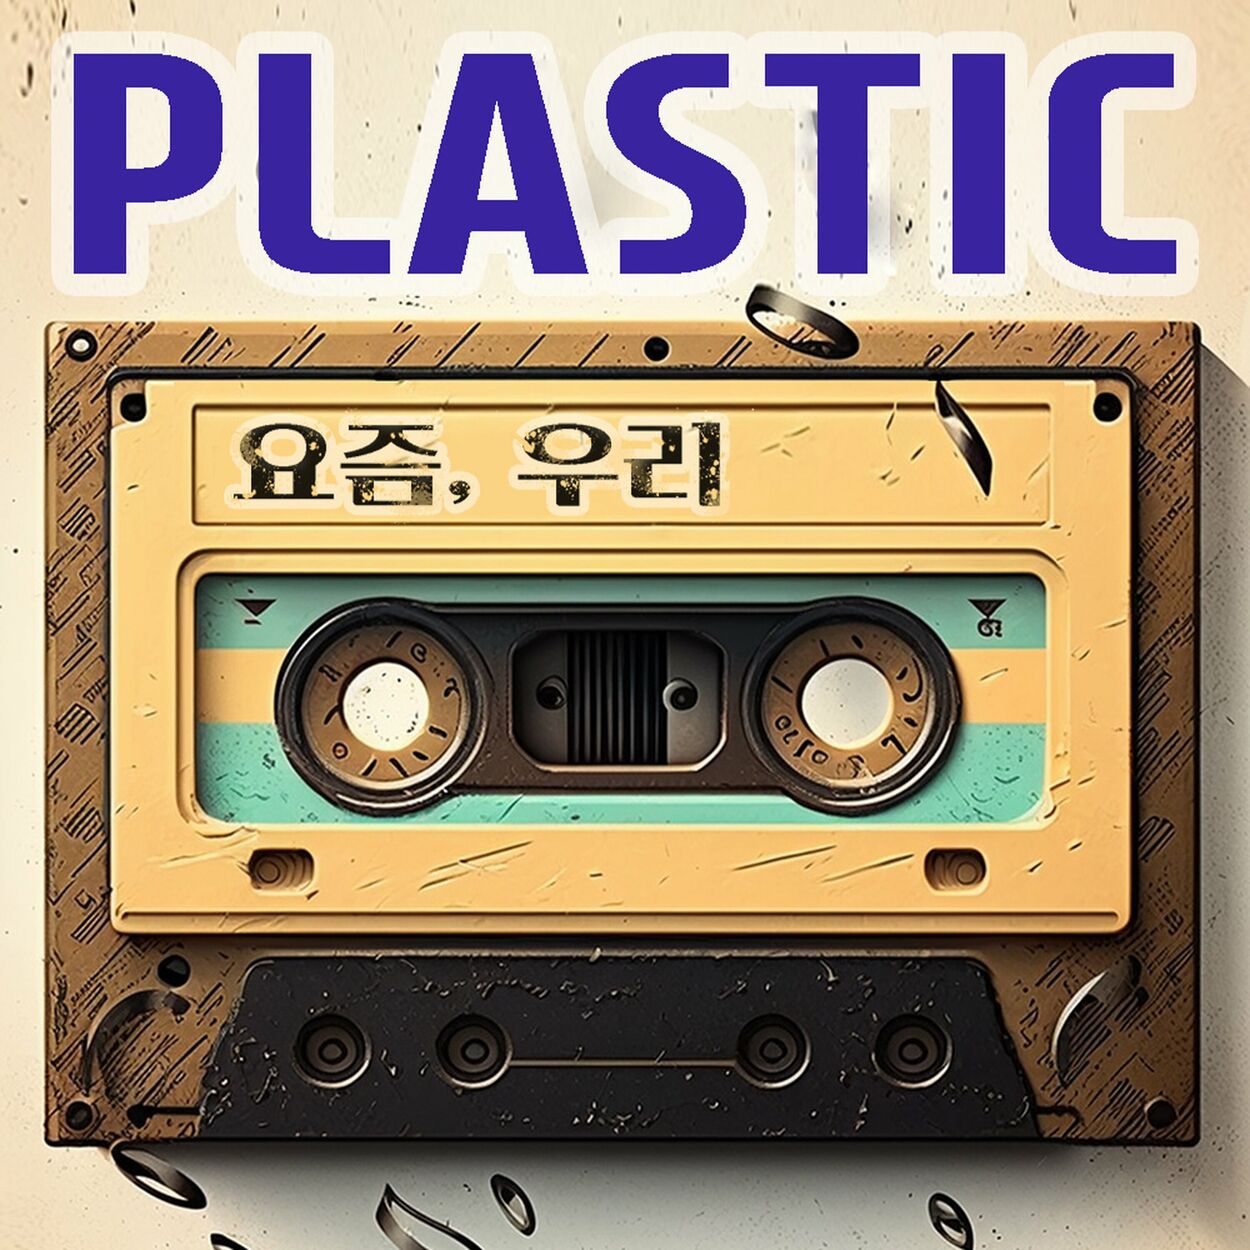 Plastic – These days, we – Single